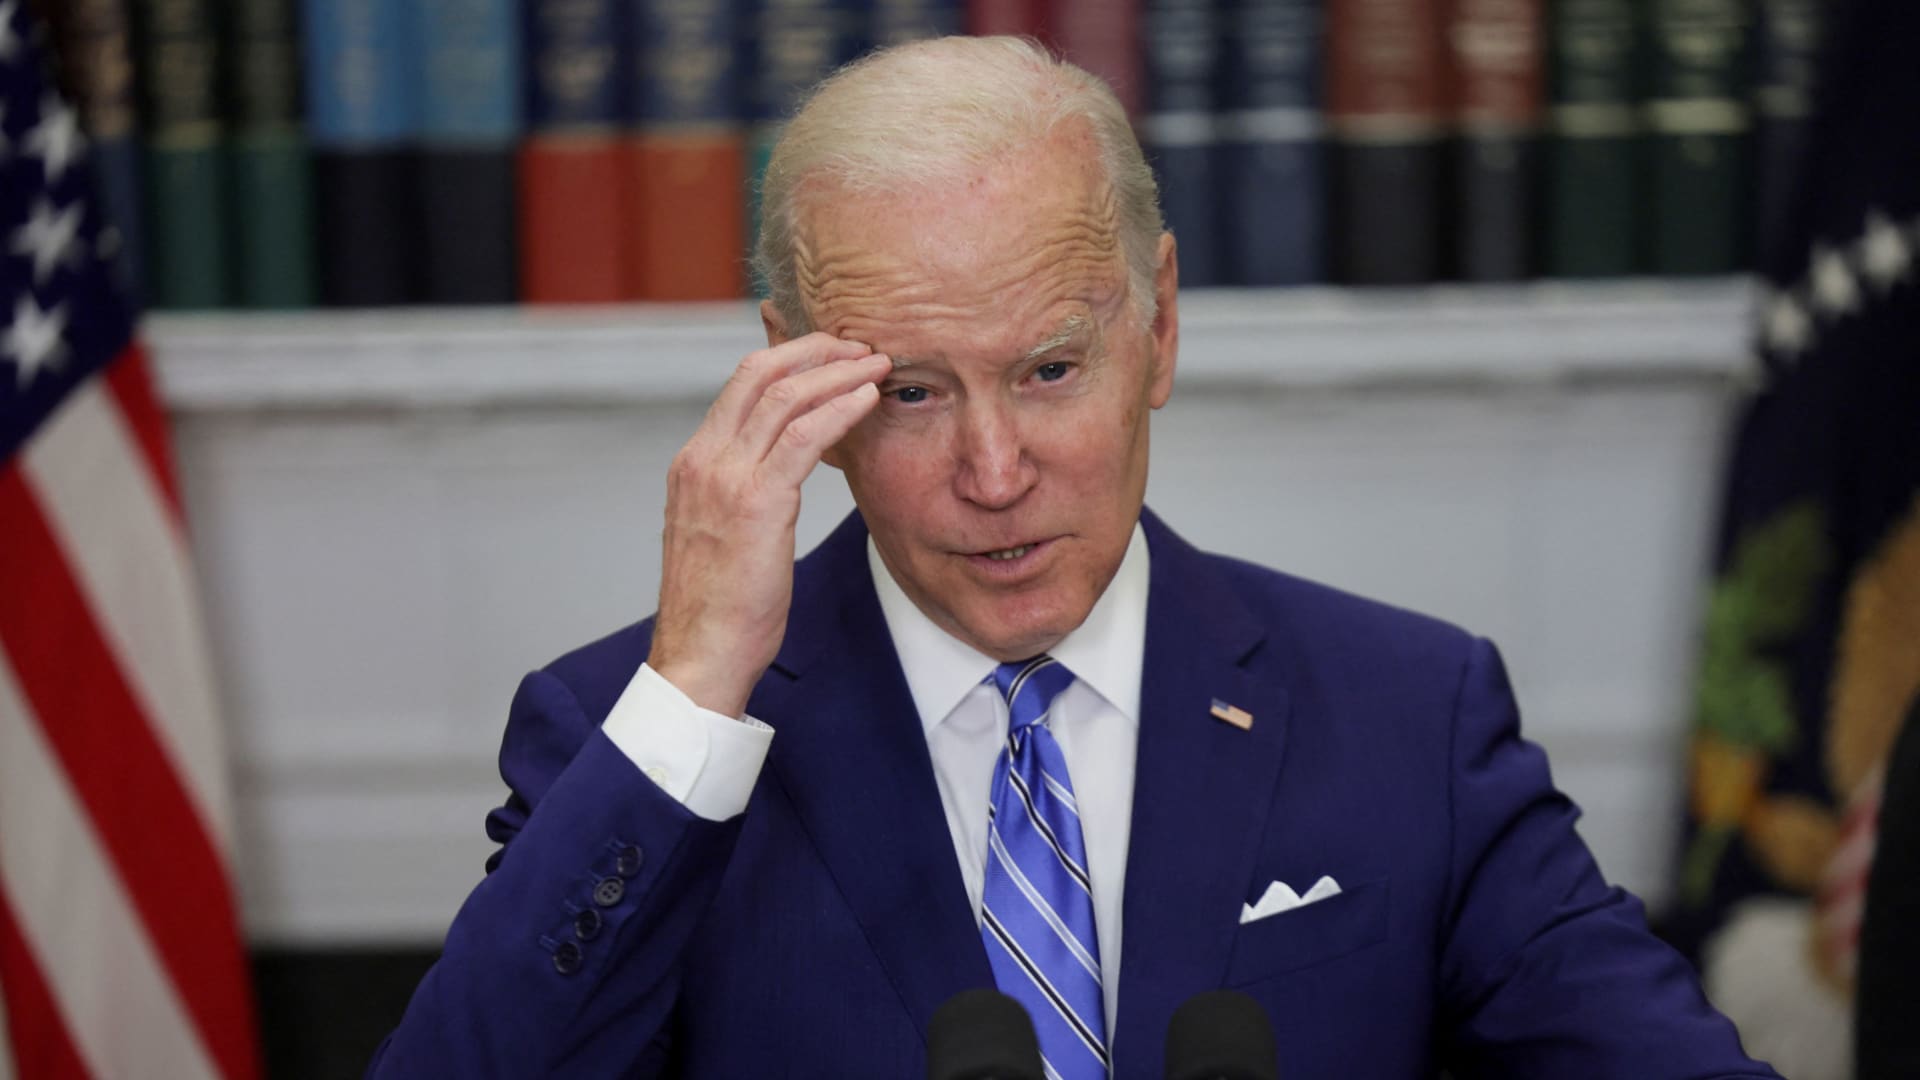 For President Biden’s approval rating to go up, it’s obvious what needs to go down